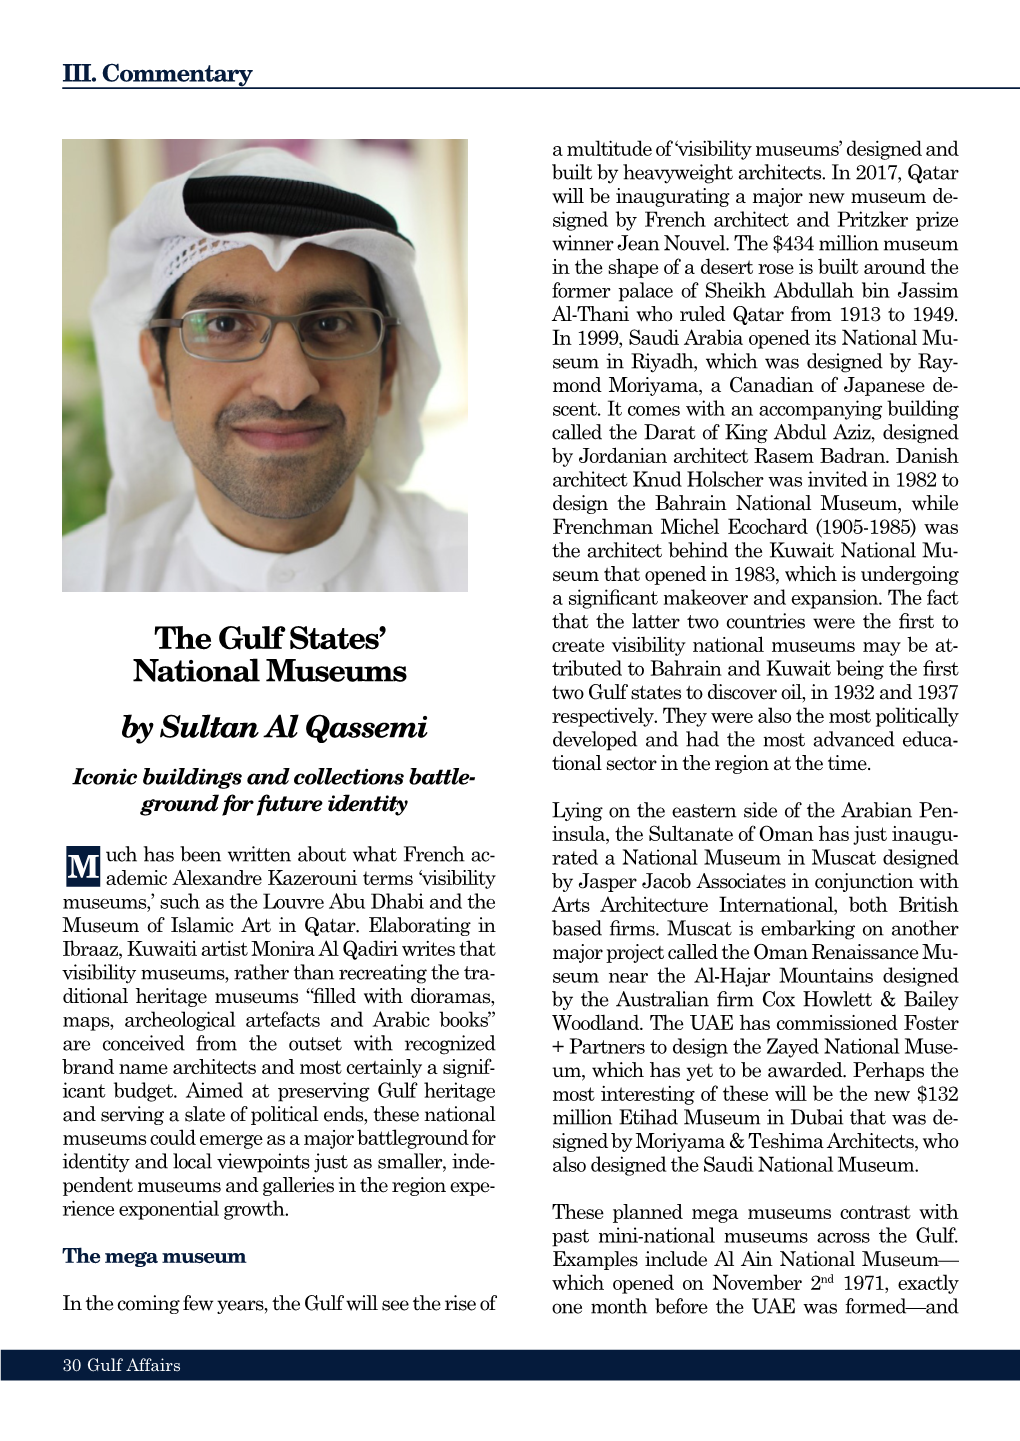 The Gulf States' National Museums by Sultan Al Qassemi